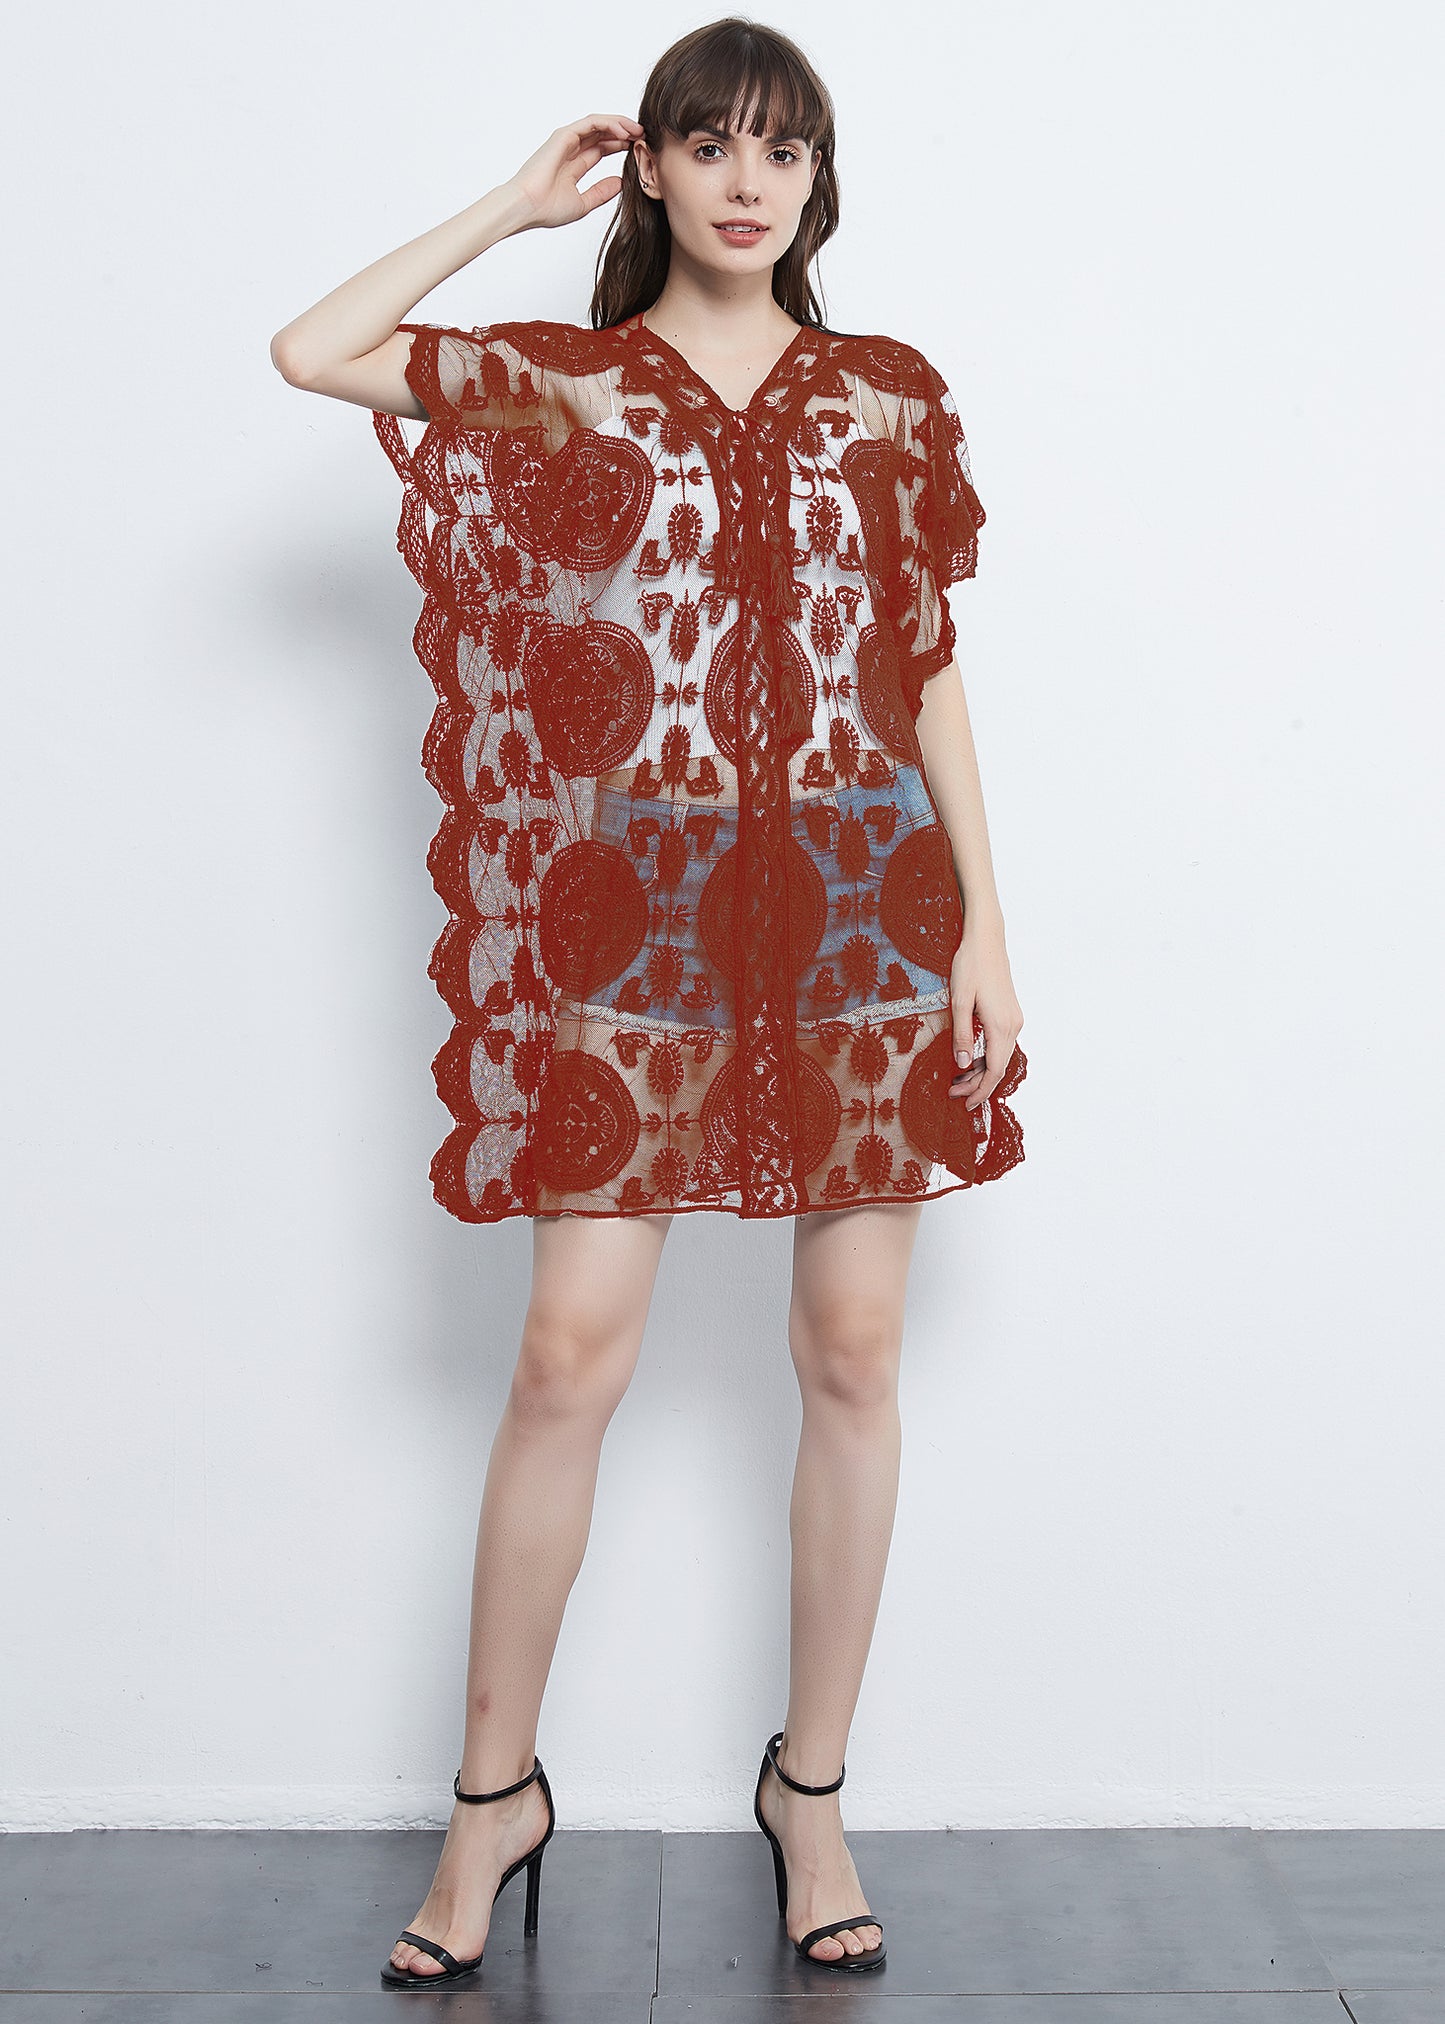 Embroidered Mesh Beach Cover Up Lace Sheer Midi Dress